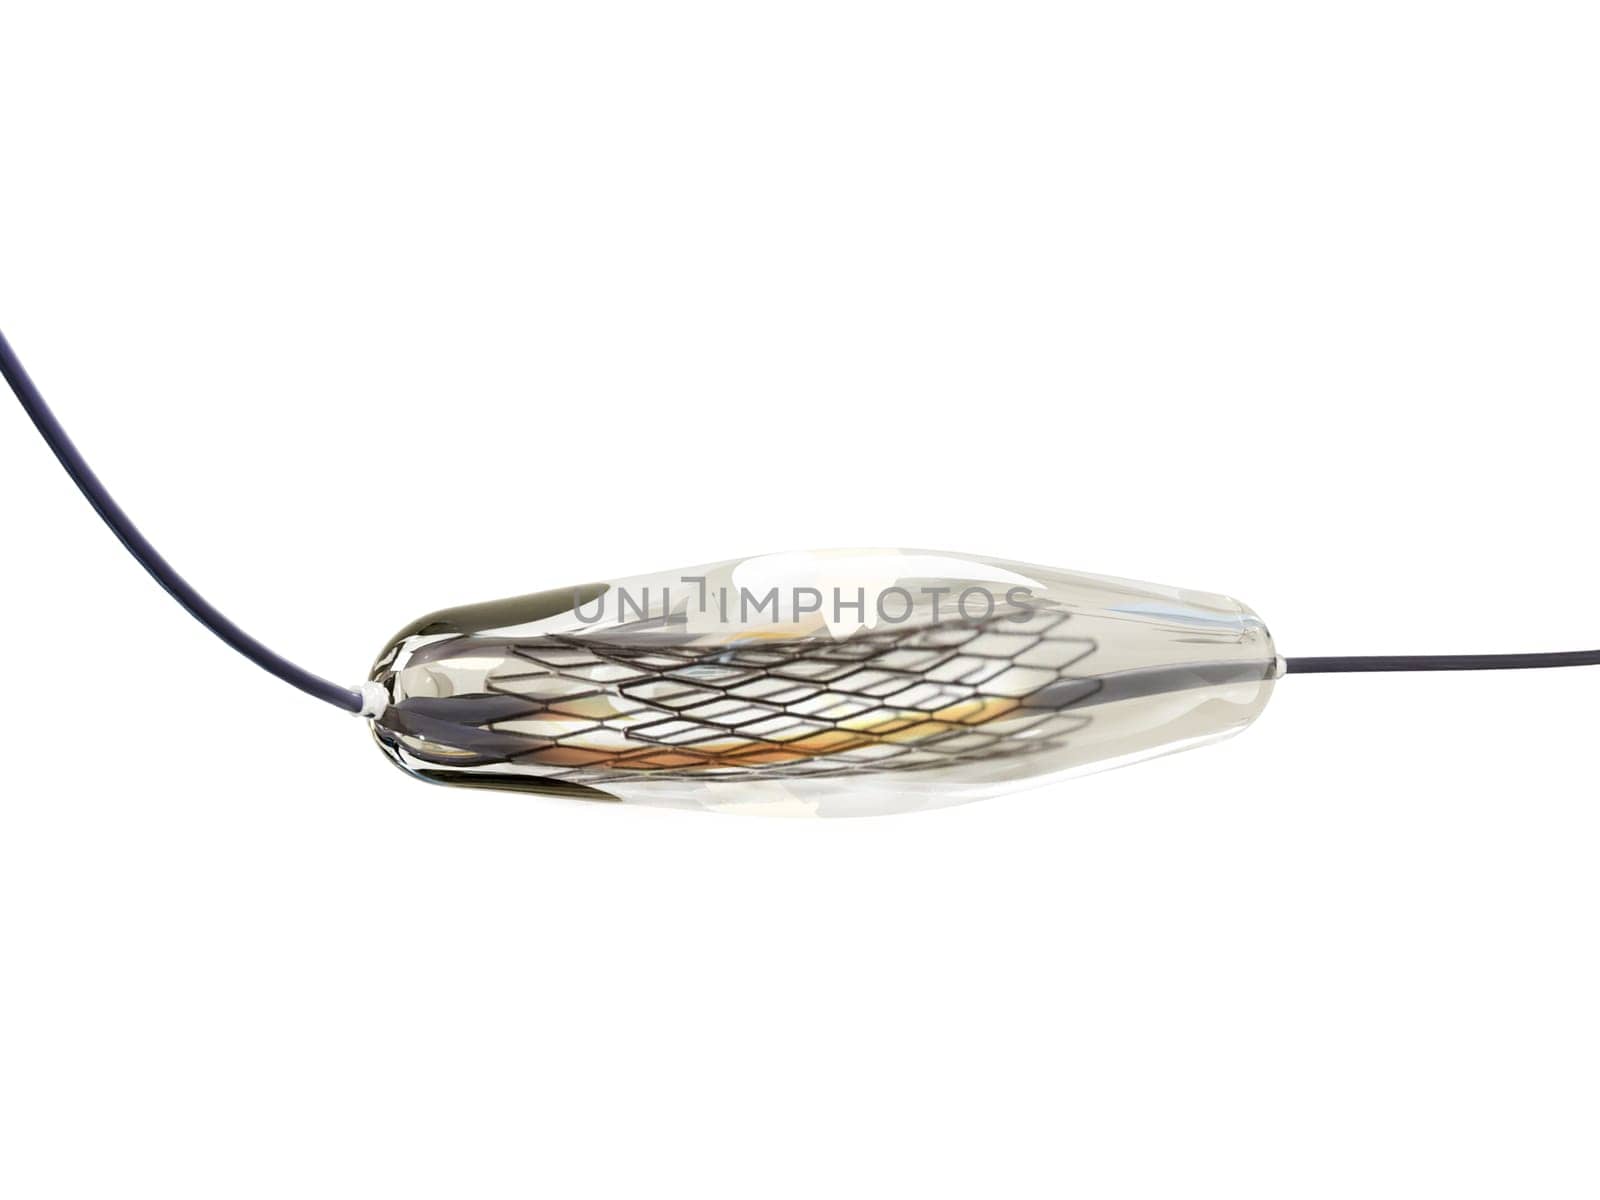 mesh metal nitinol self-expandable stent 3D rendering for endovascular surgery isolated on white background. Clipping path.